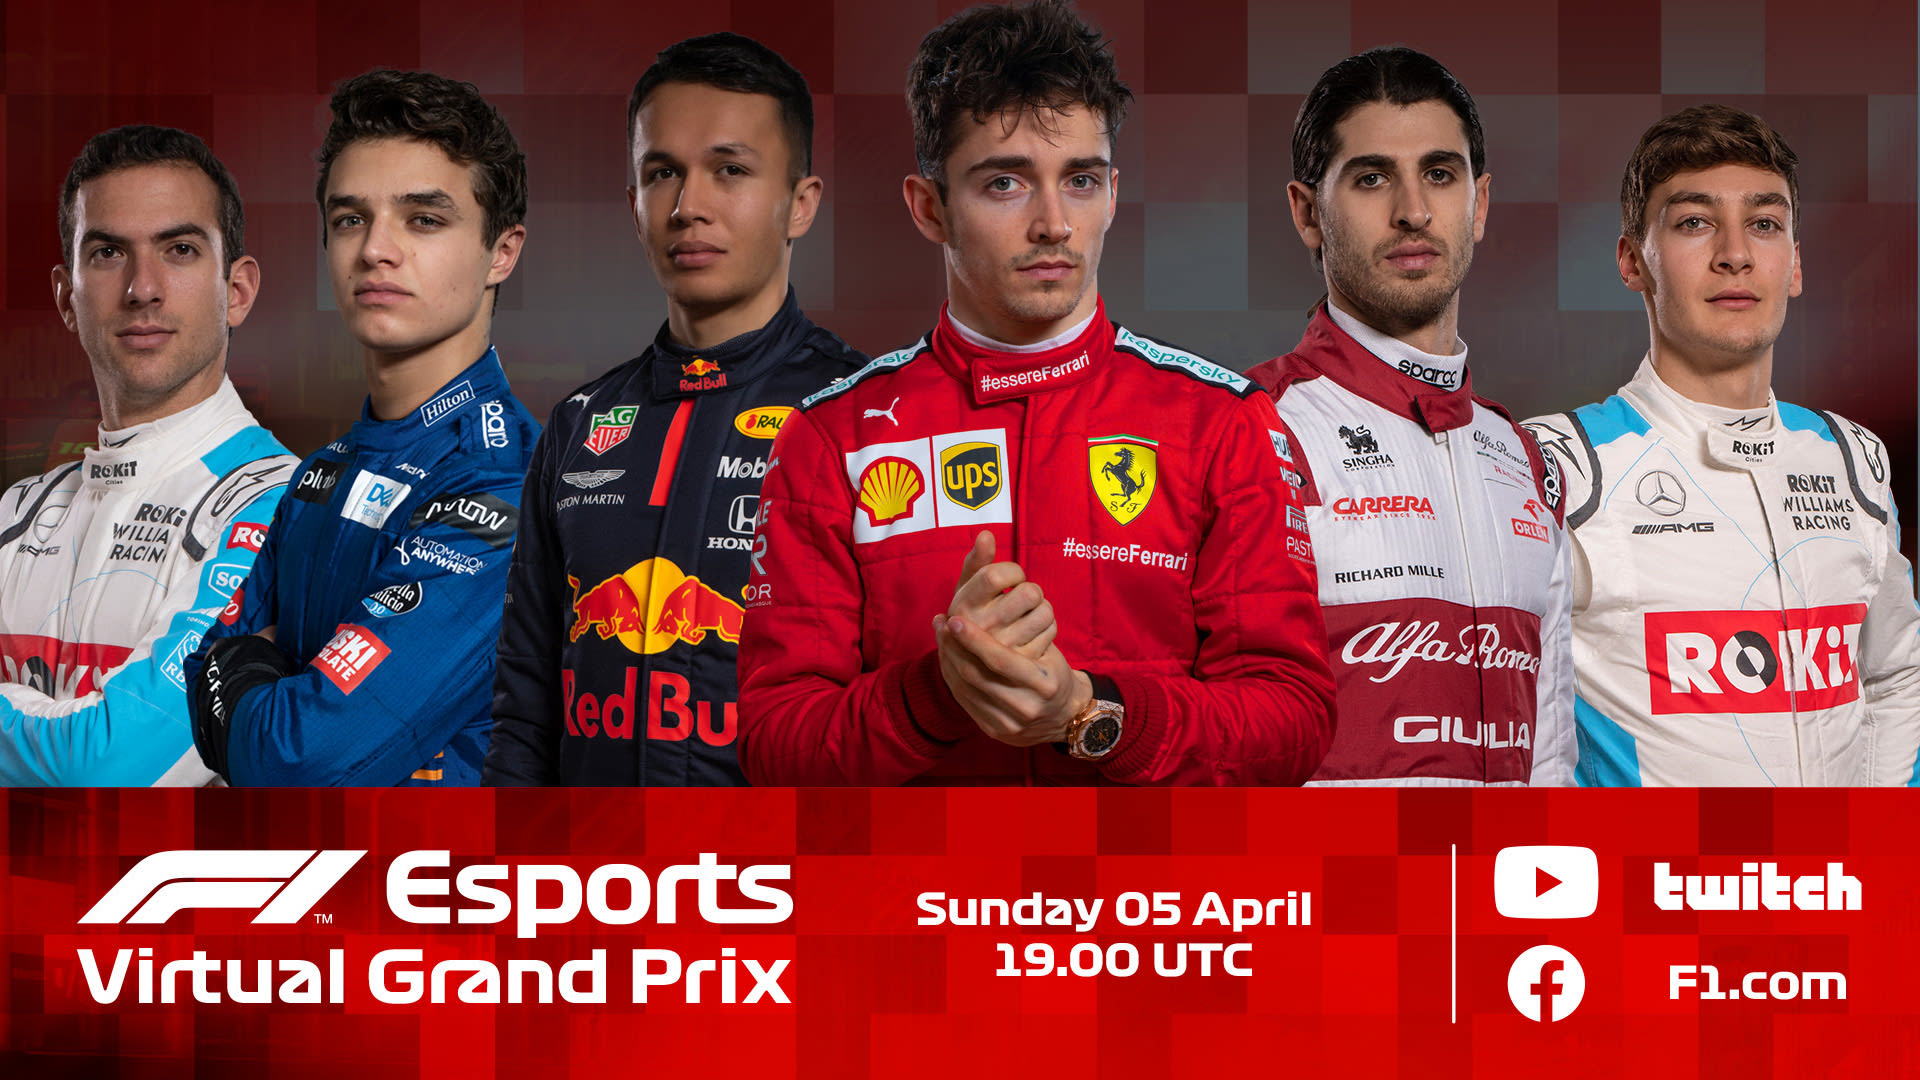 Charles Leclerc, Alex Albon and George Russell join the grid for this weekends F1 Esports Virtual Grand Prix Formula 1®